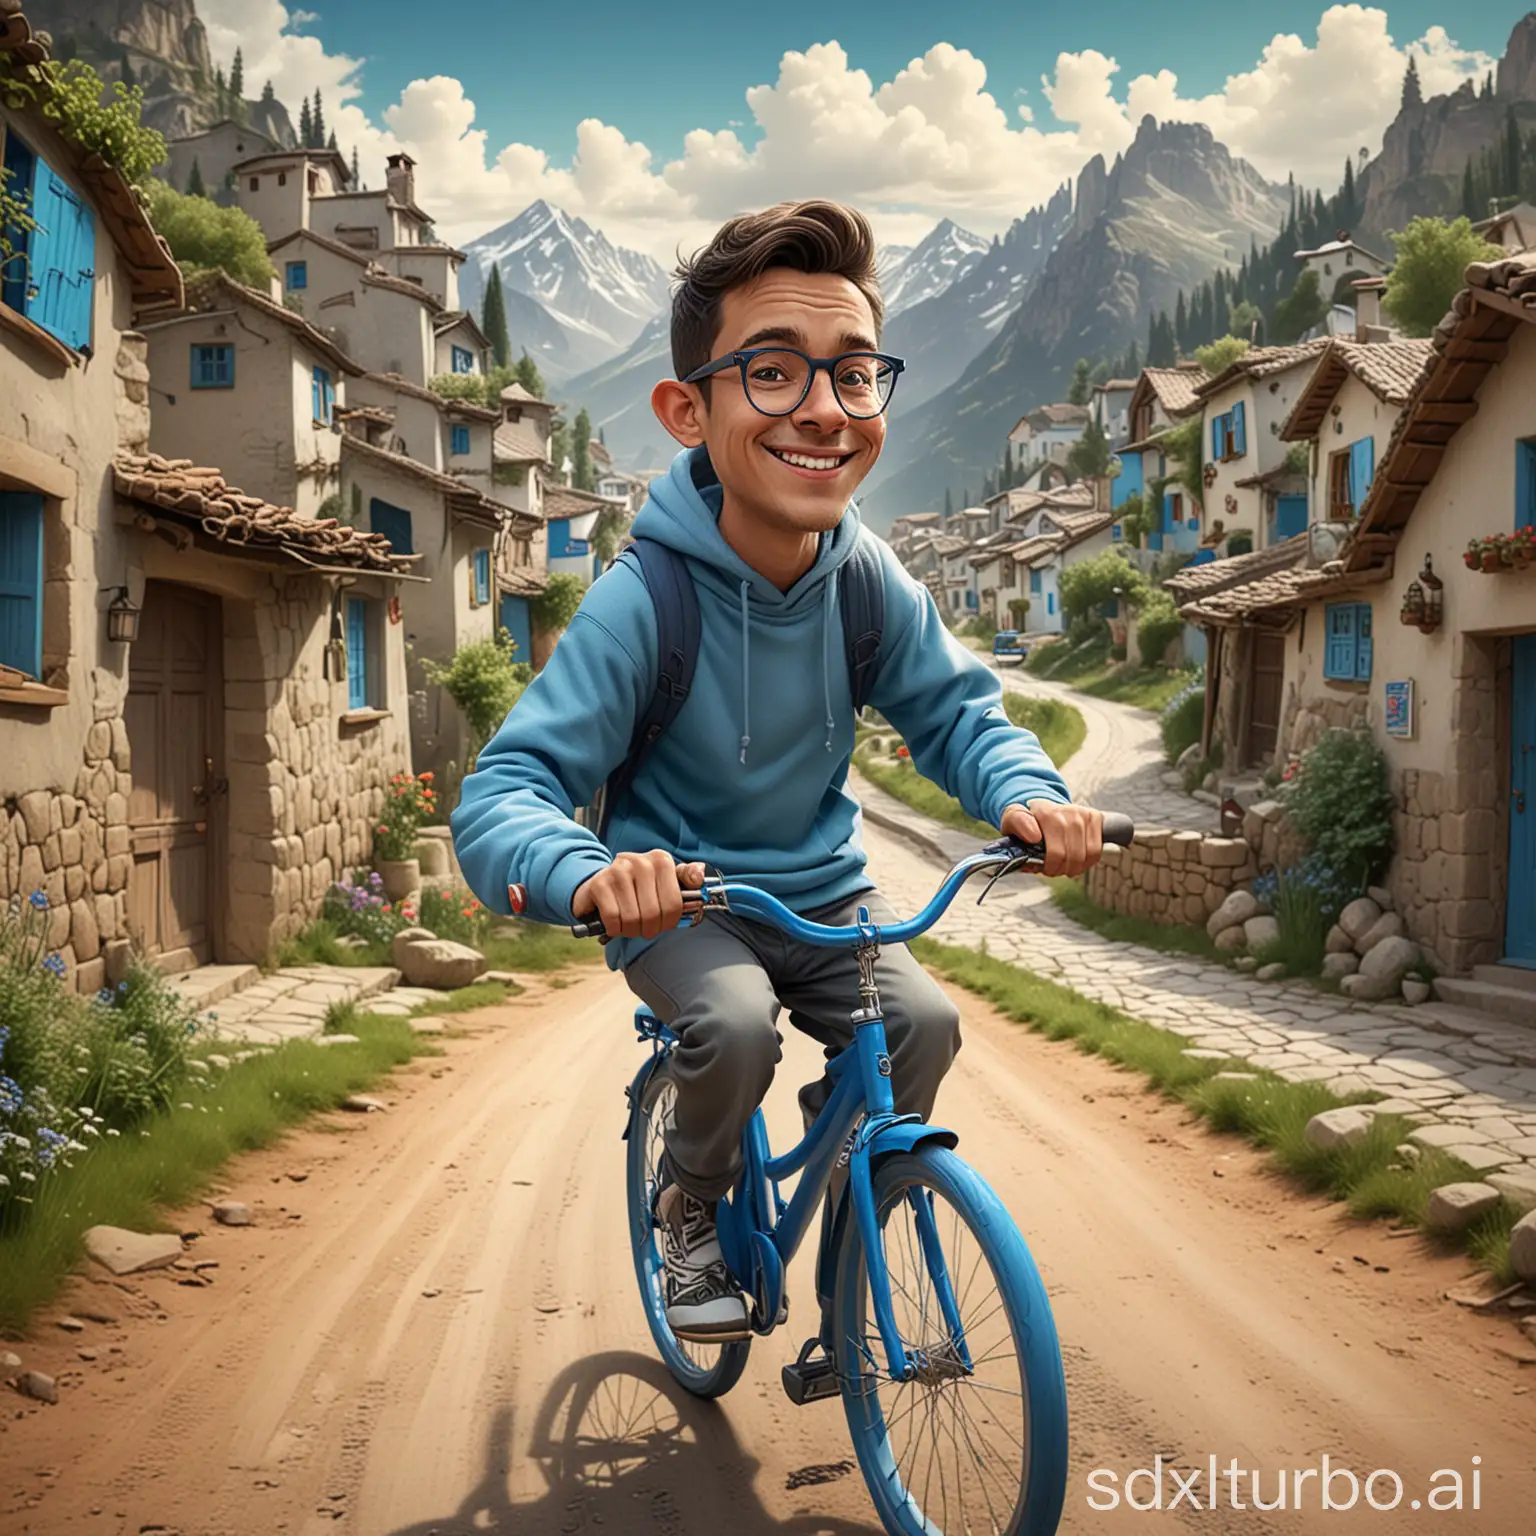 4d Caricature Design A young man with glasses and a hoodie, riding a blue bicycle down a winding road in a mountainous village.